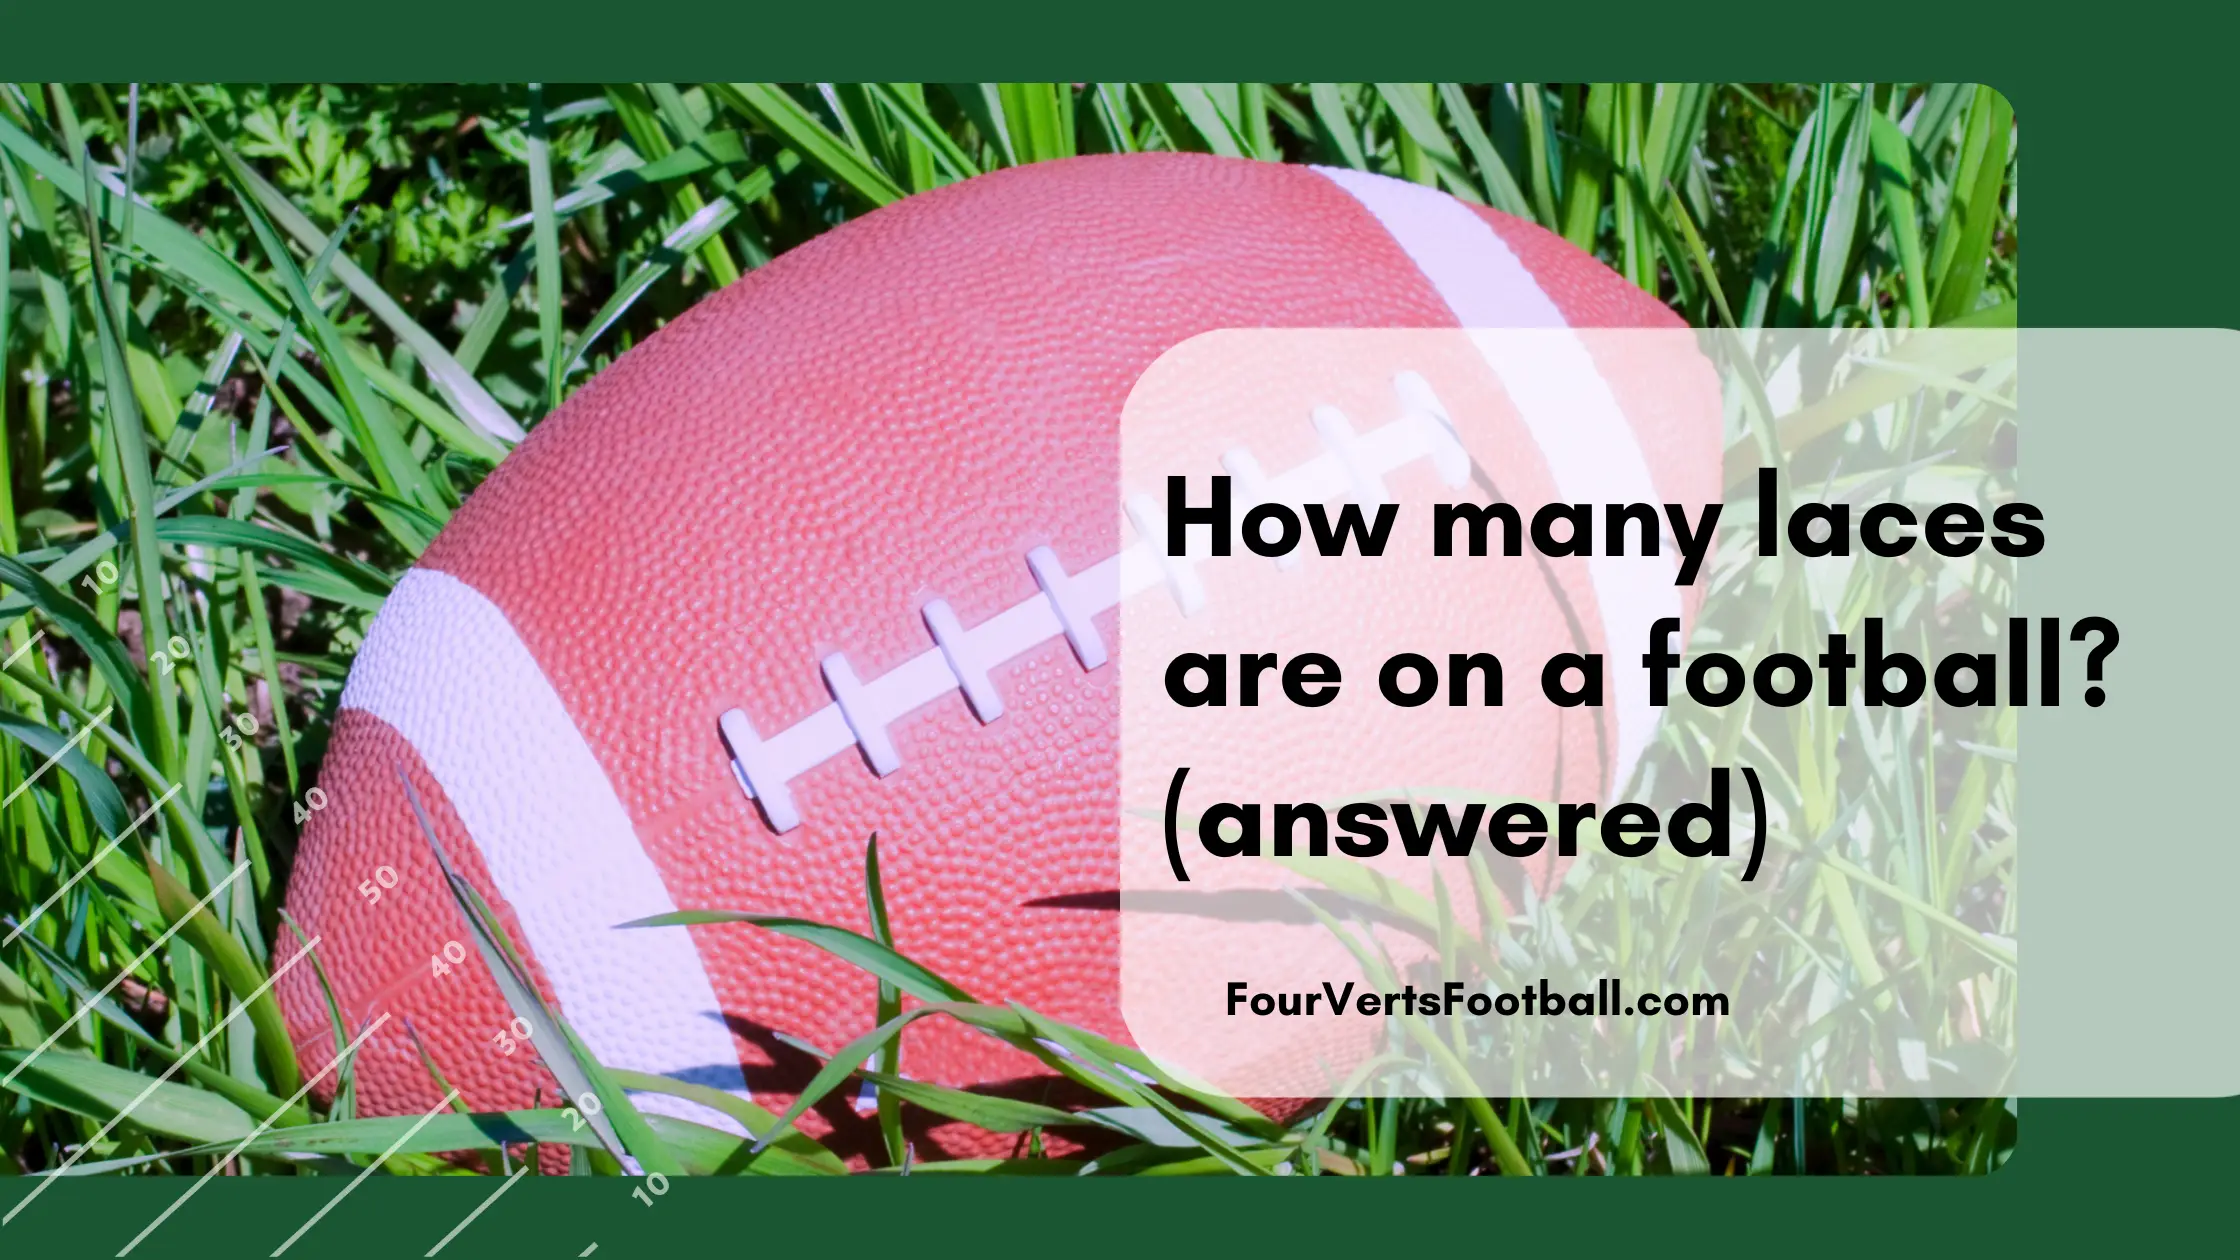 How many laces are on a football?